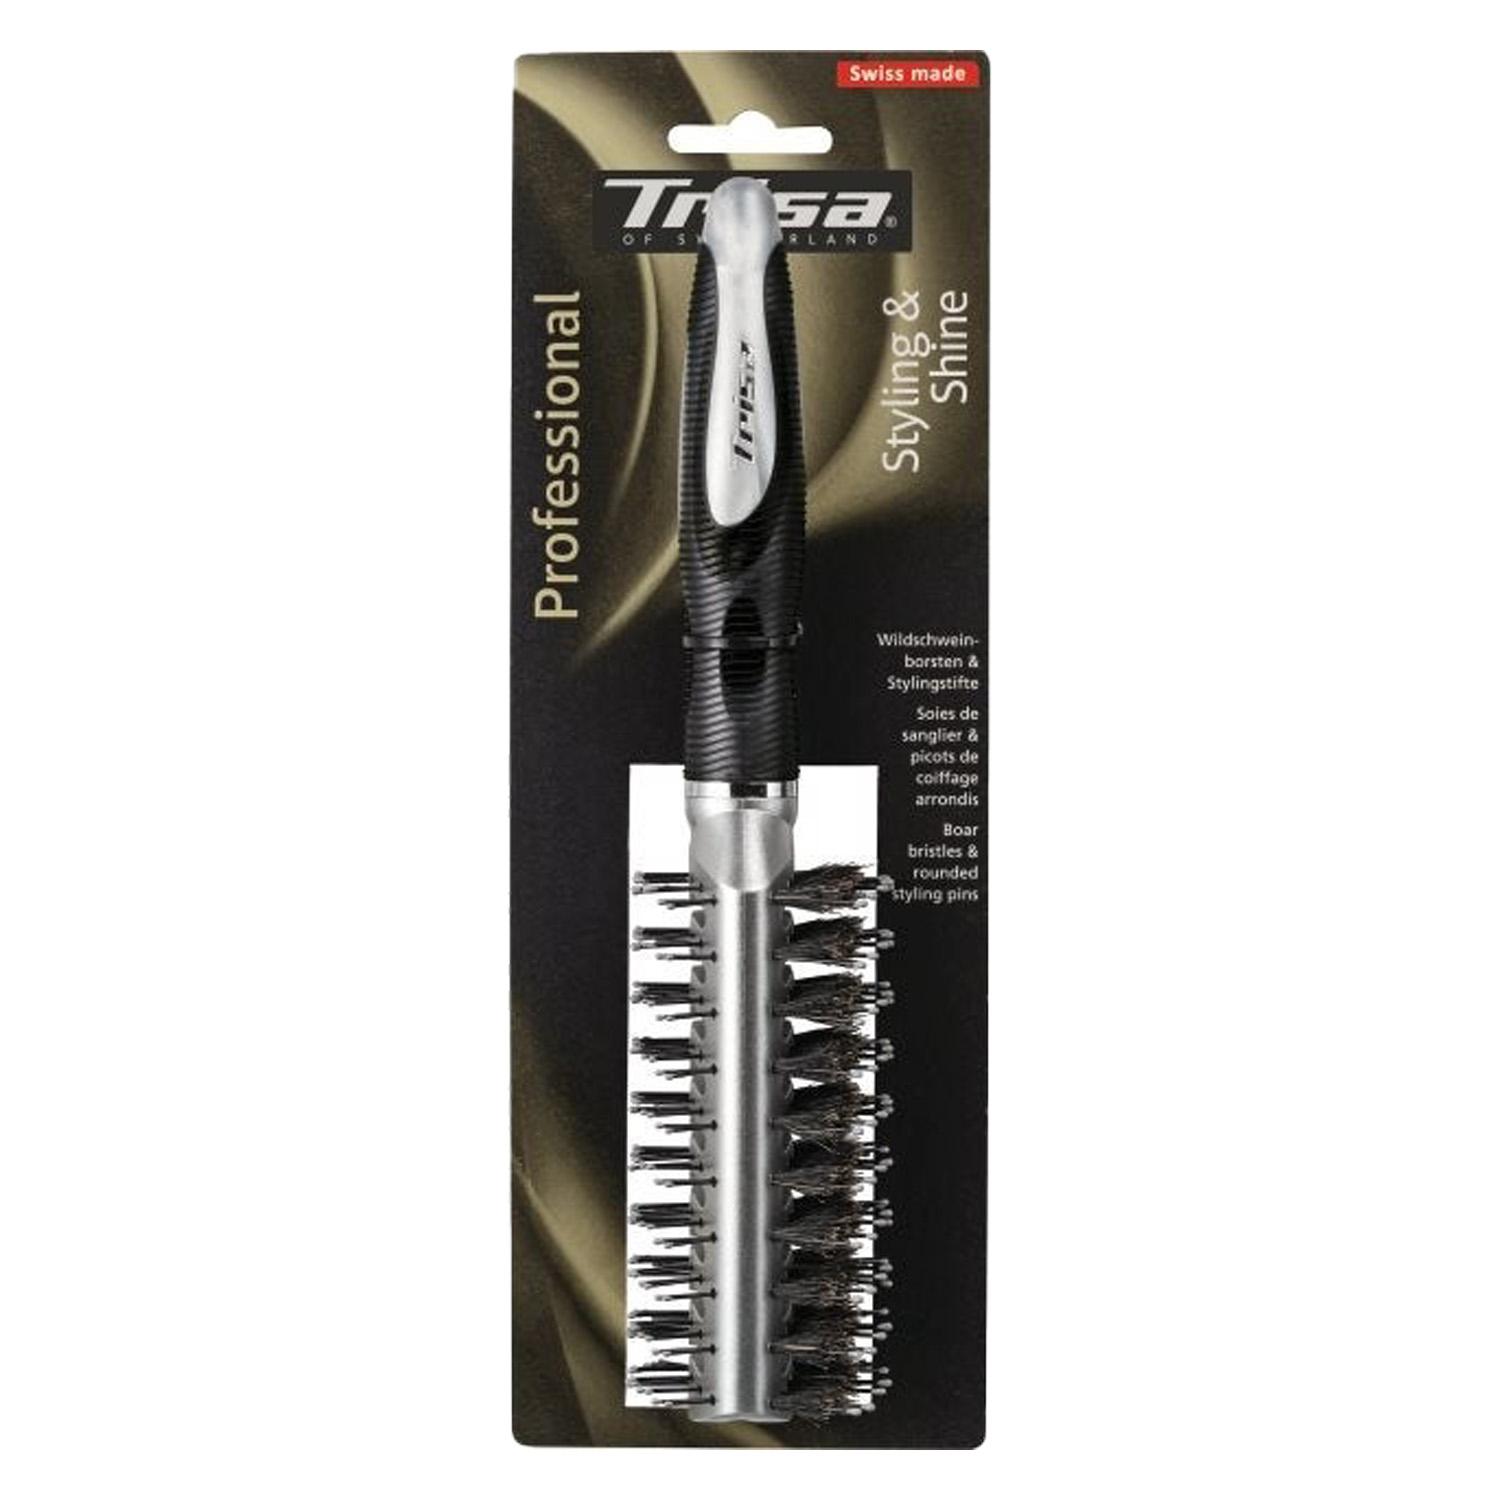 Trisa Hair Care - Professional Styling & Shine Boar Bristles & Rounded Styling Pins Black